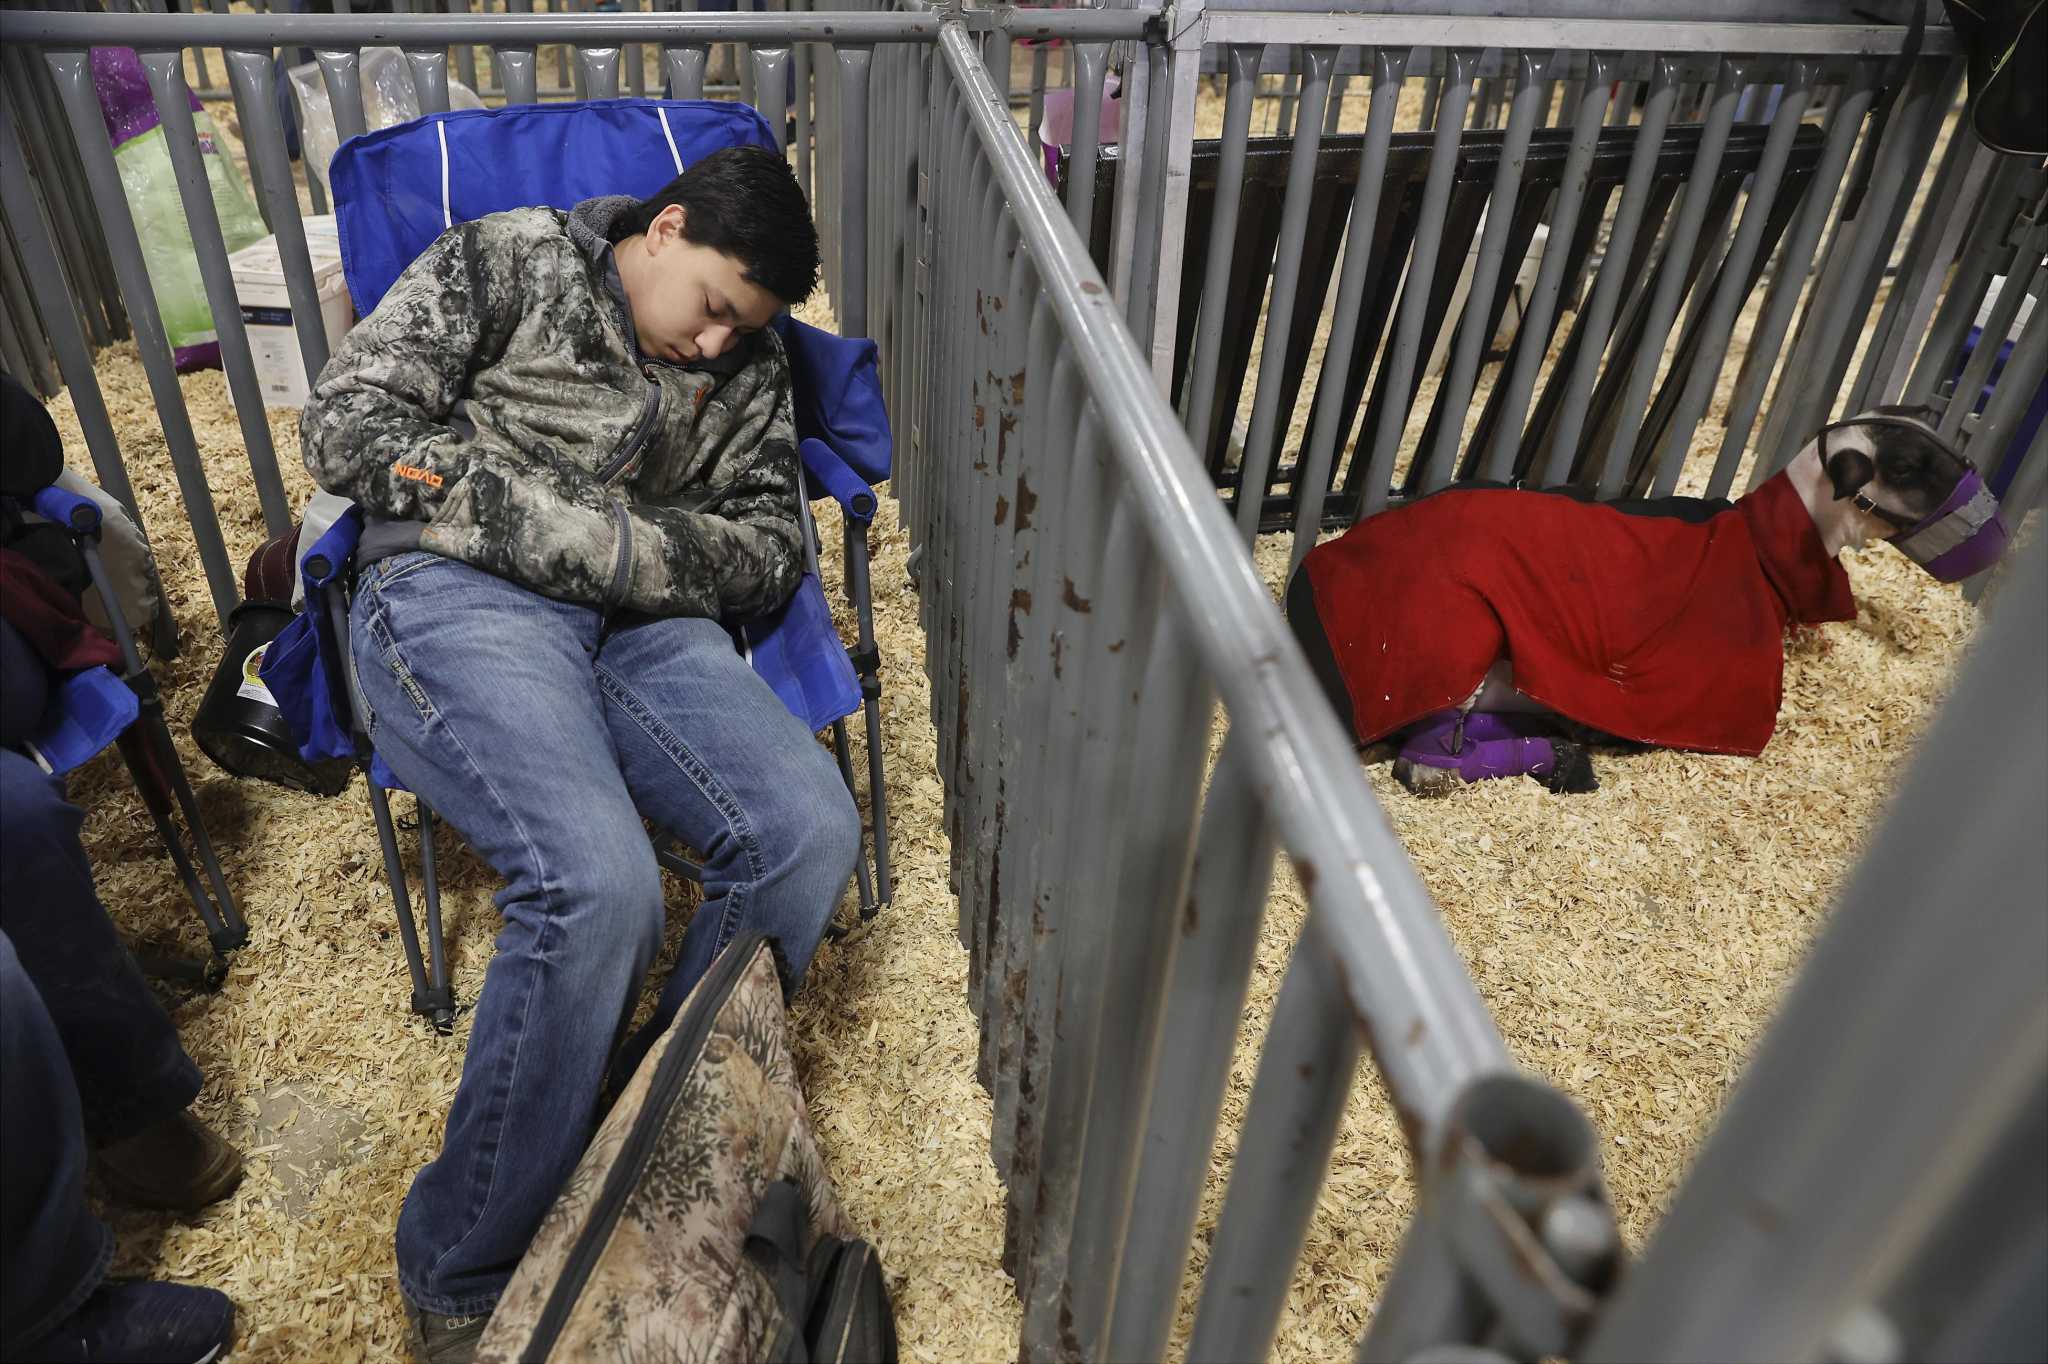  Months of feeding and grooming lambs pays off at the San Antonio livestock show 